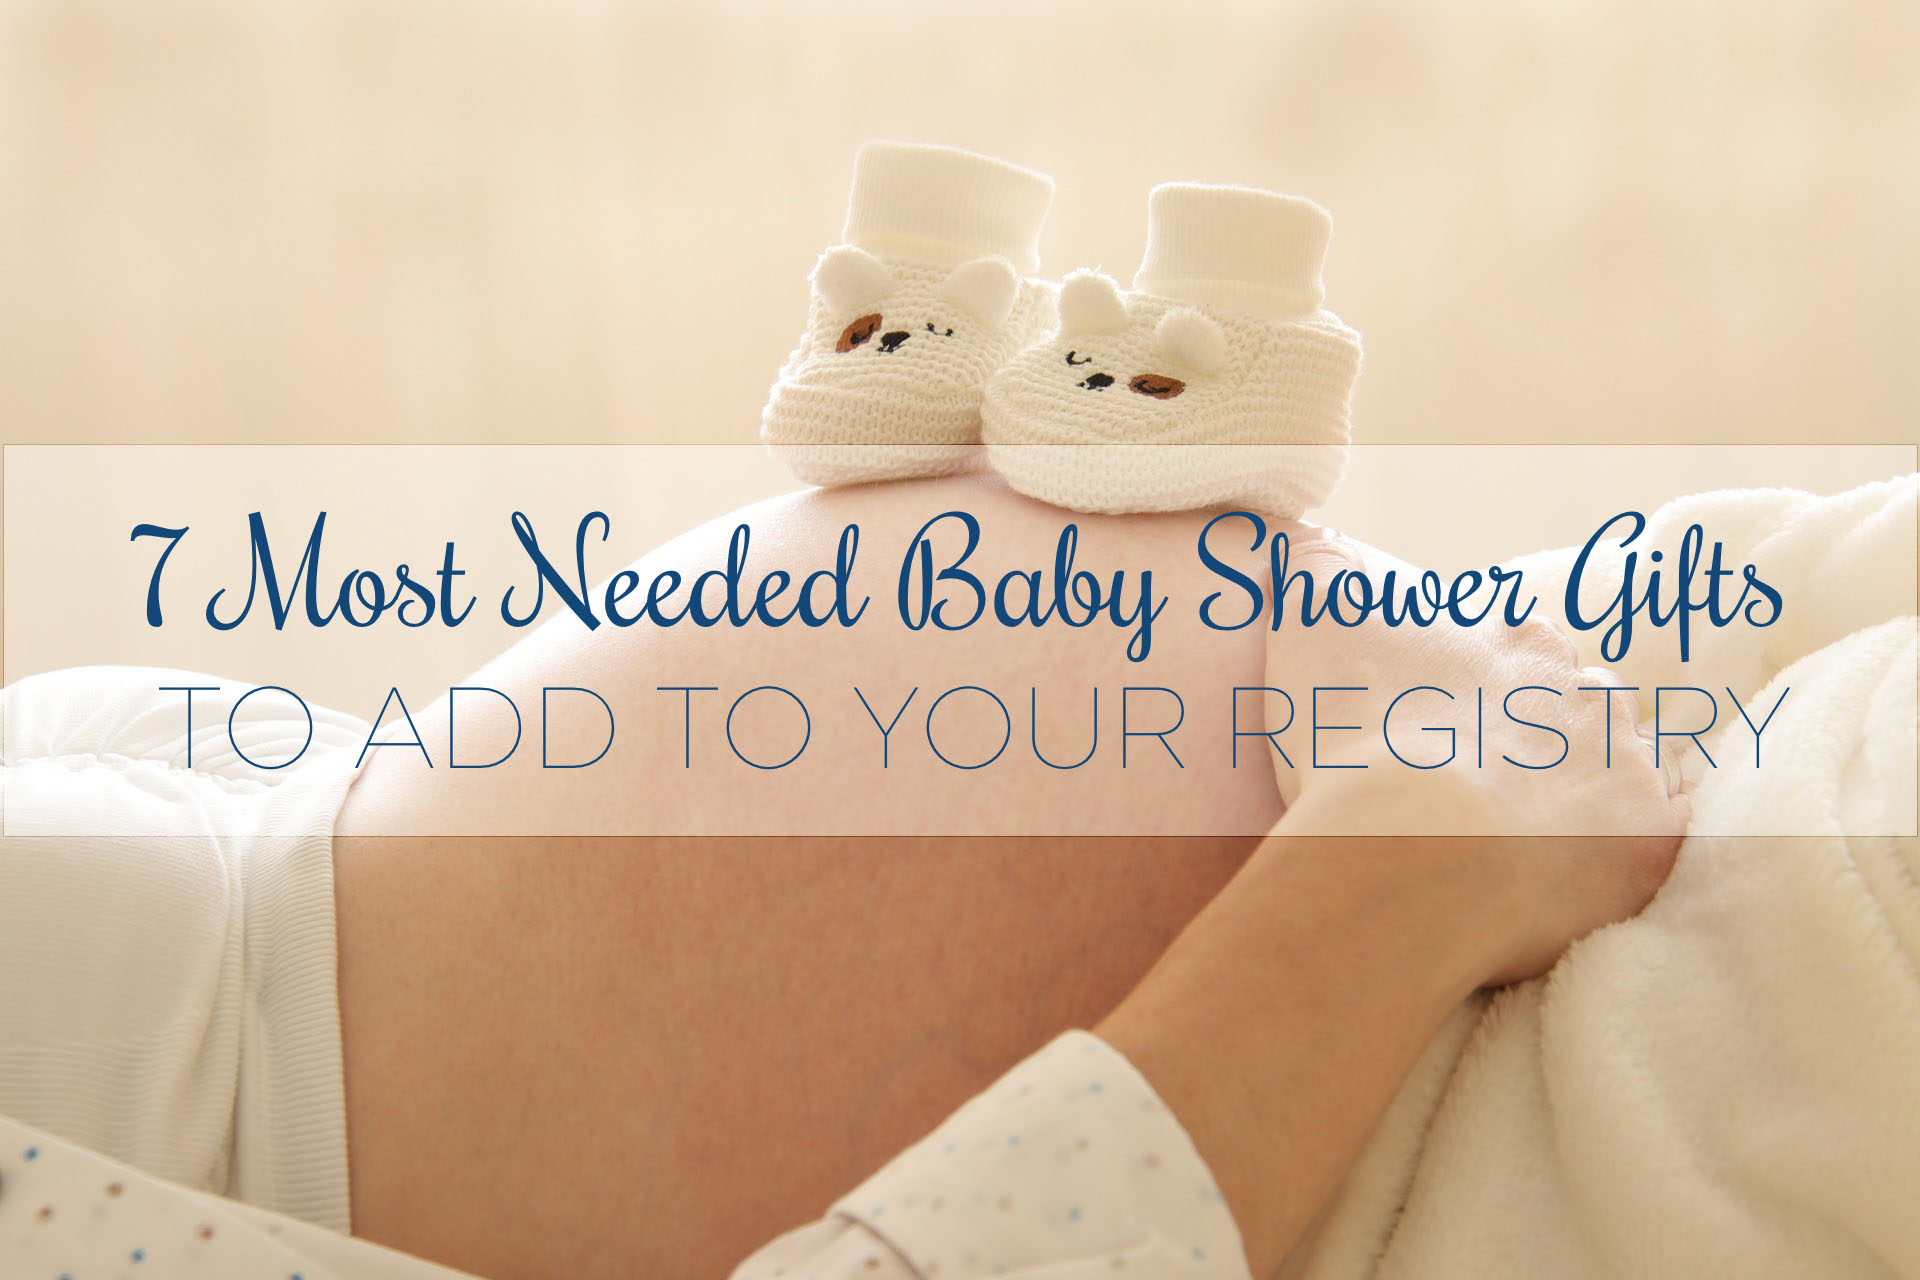 7 Most Needed Items For Your Baby Registry